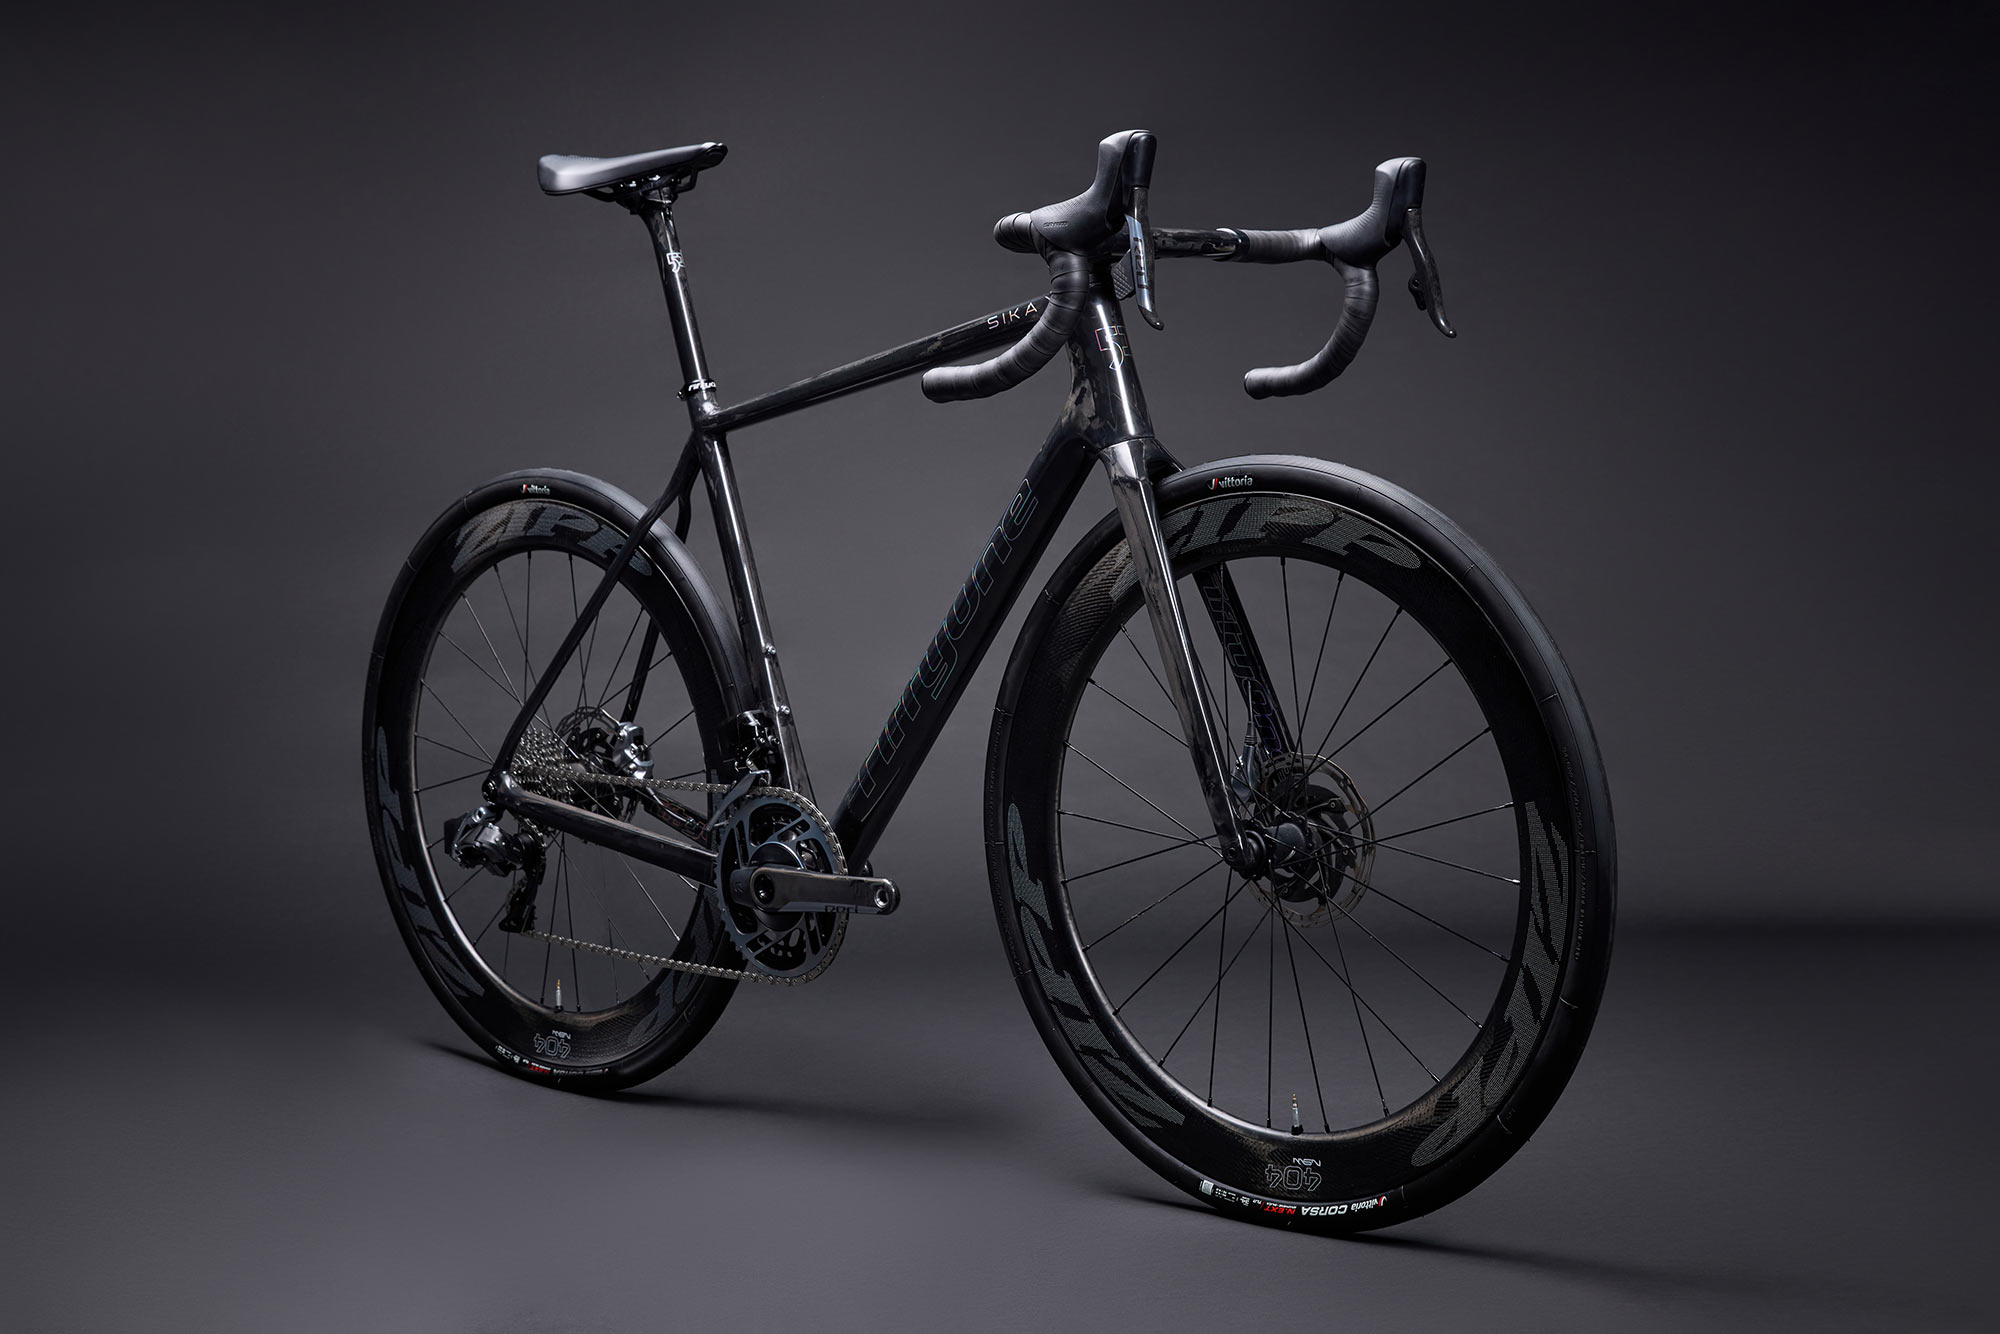 fiftyone sika road bike shown from front angle